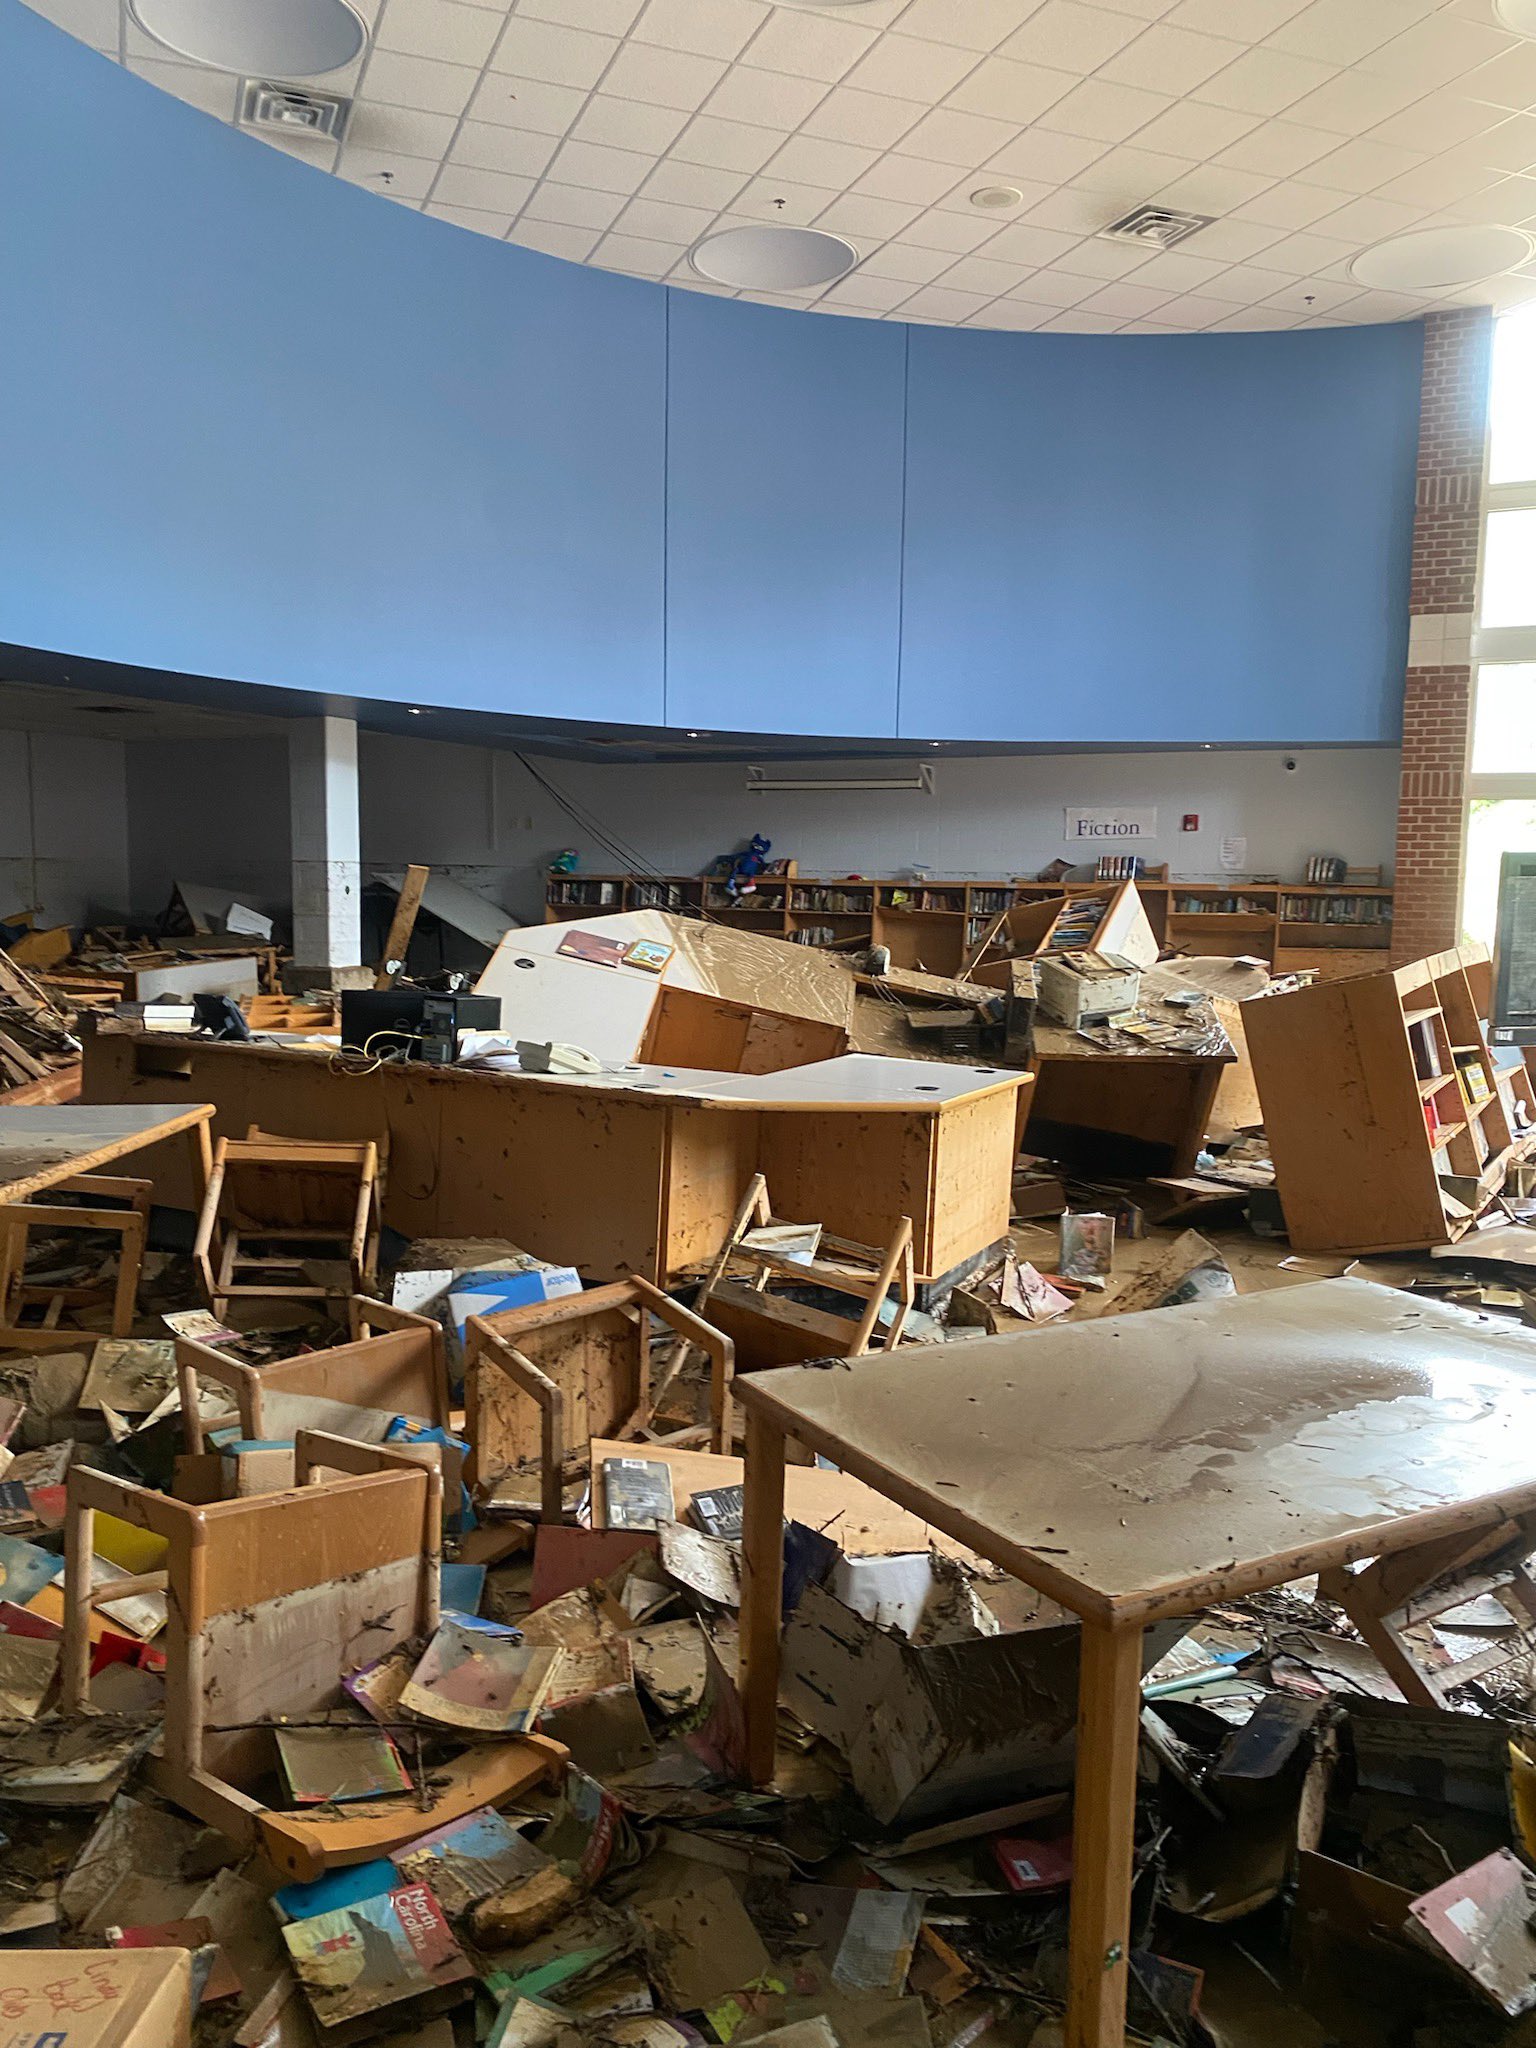 Buckhorn School in Perry County severely damaged due to flash flooding.